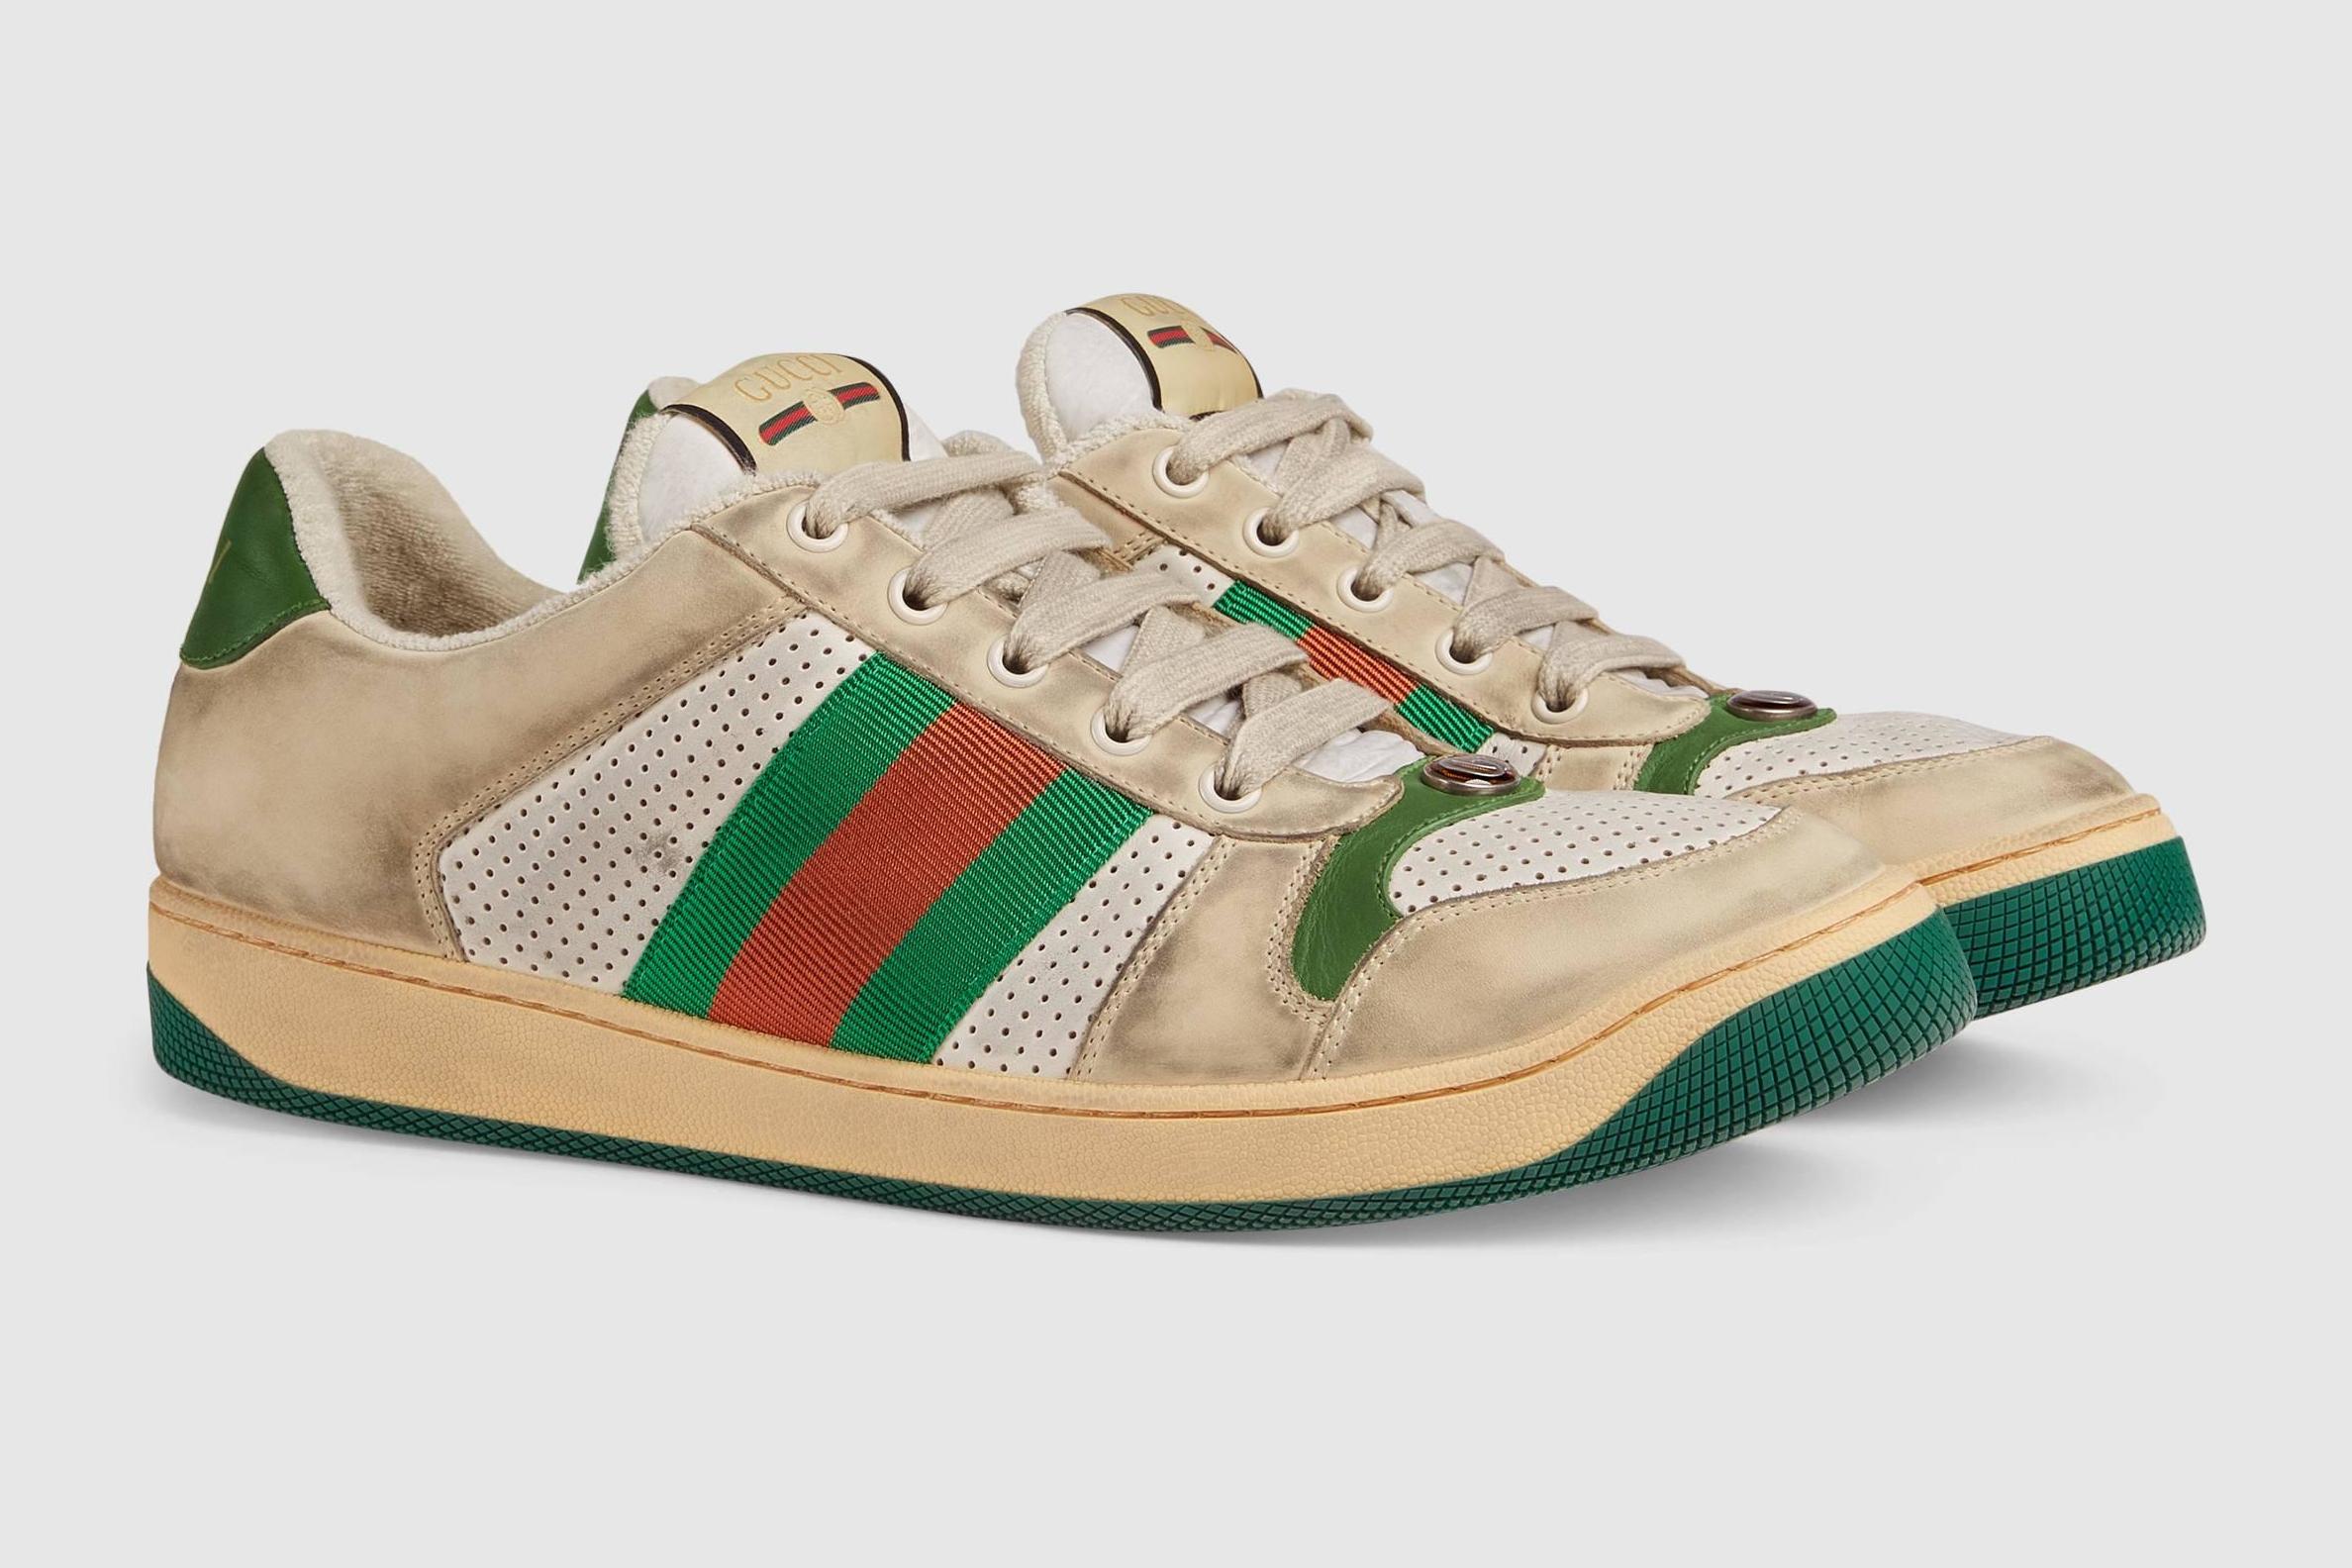 Gucci selling pair of 'dirty' trainers 